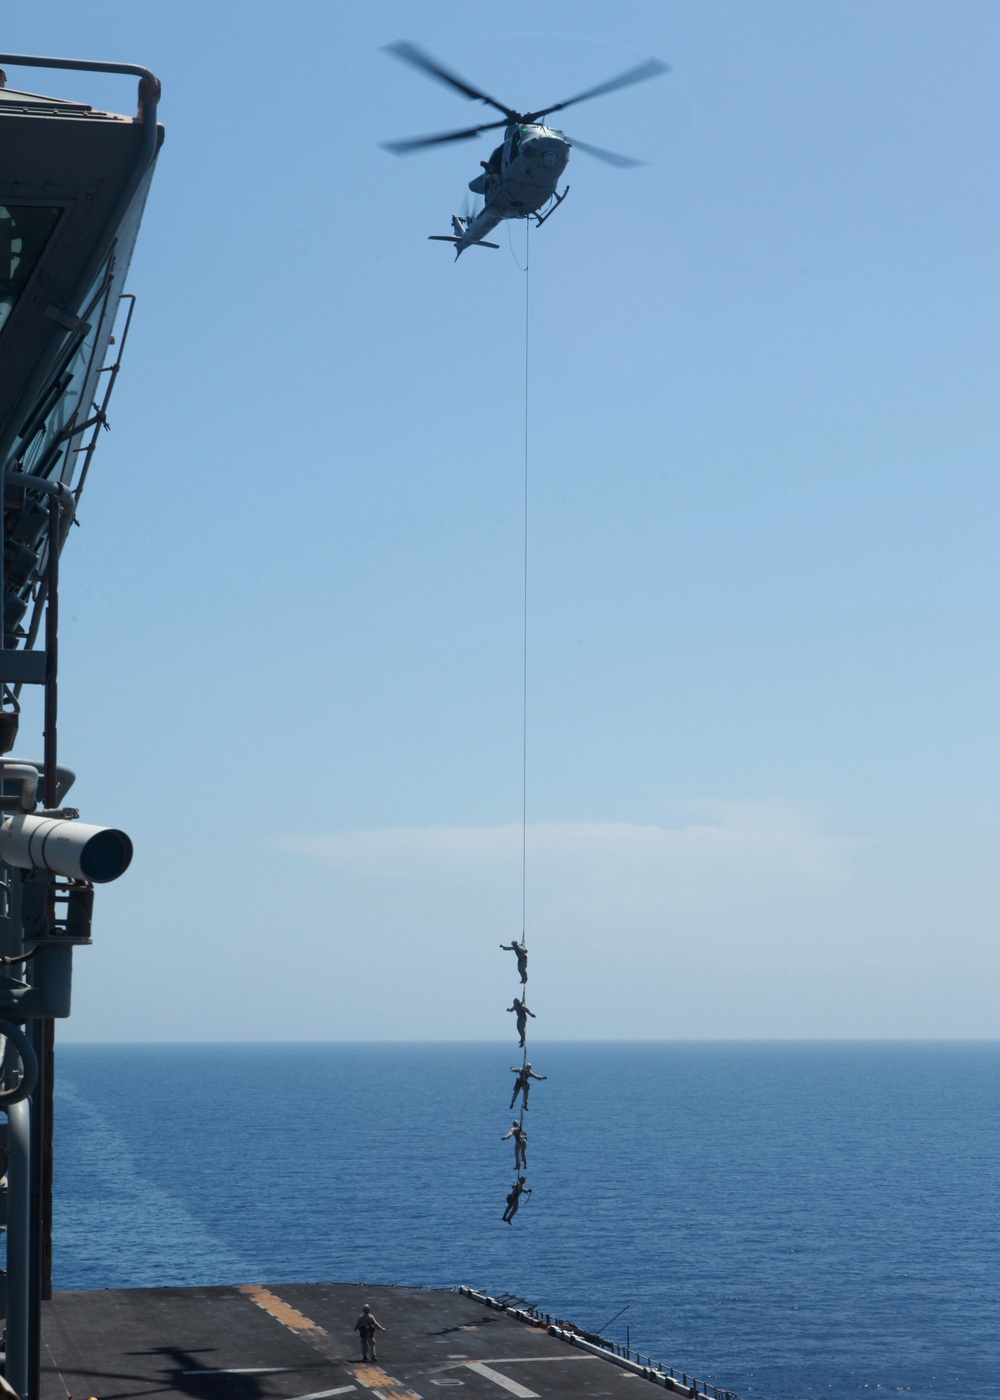 MRF conducts special patrol insertion/extraction training from a UH-1Y Huey